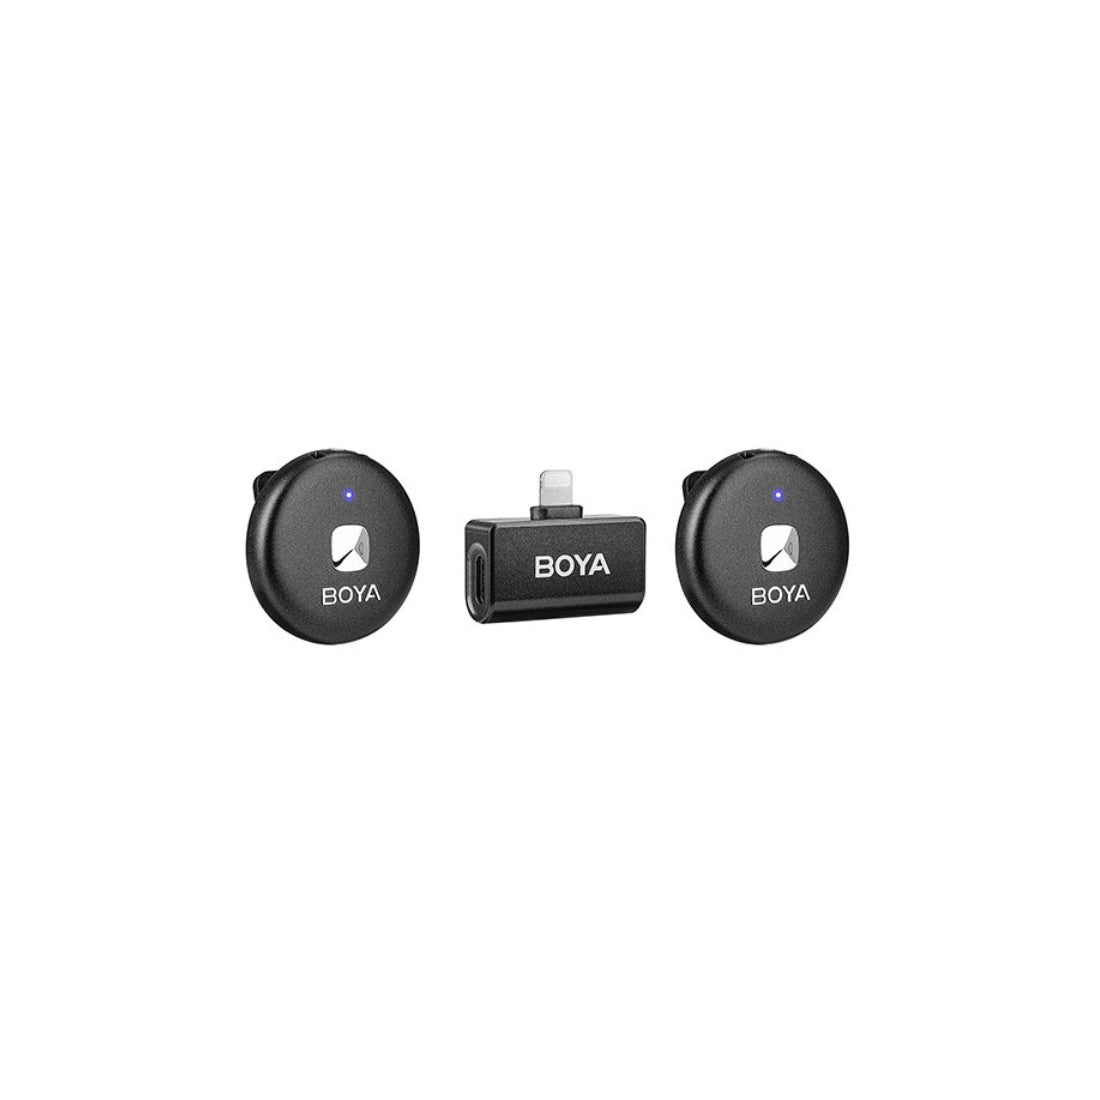 Boya Omic-D 2.4GHz Dual-Channel Wireless With Lightning Connector Microphone System - Black - ميكروفون